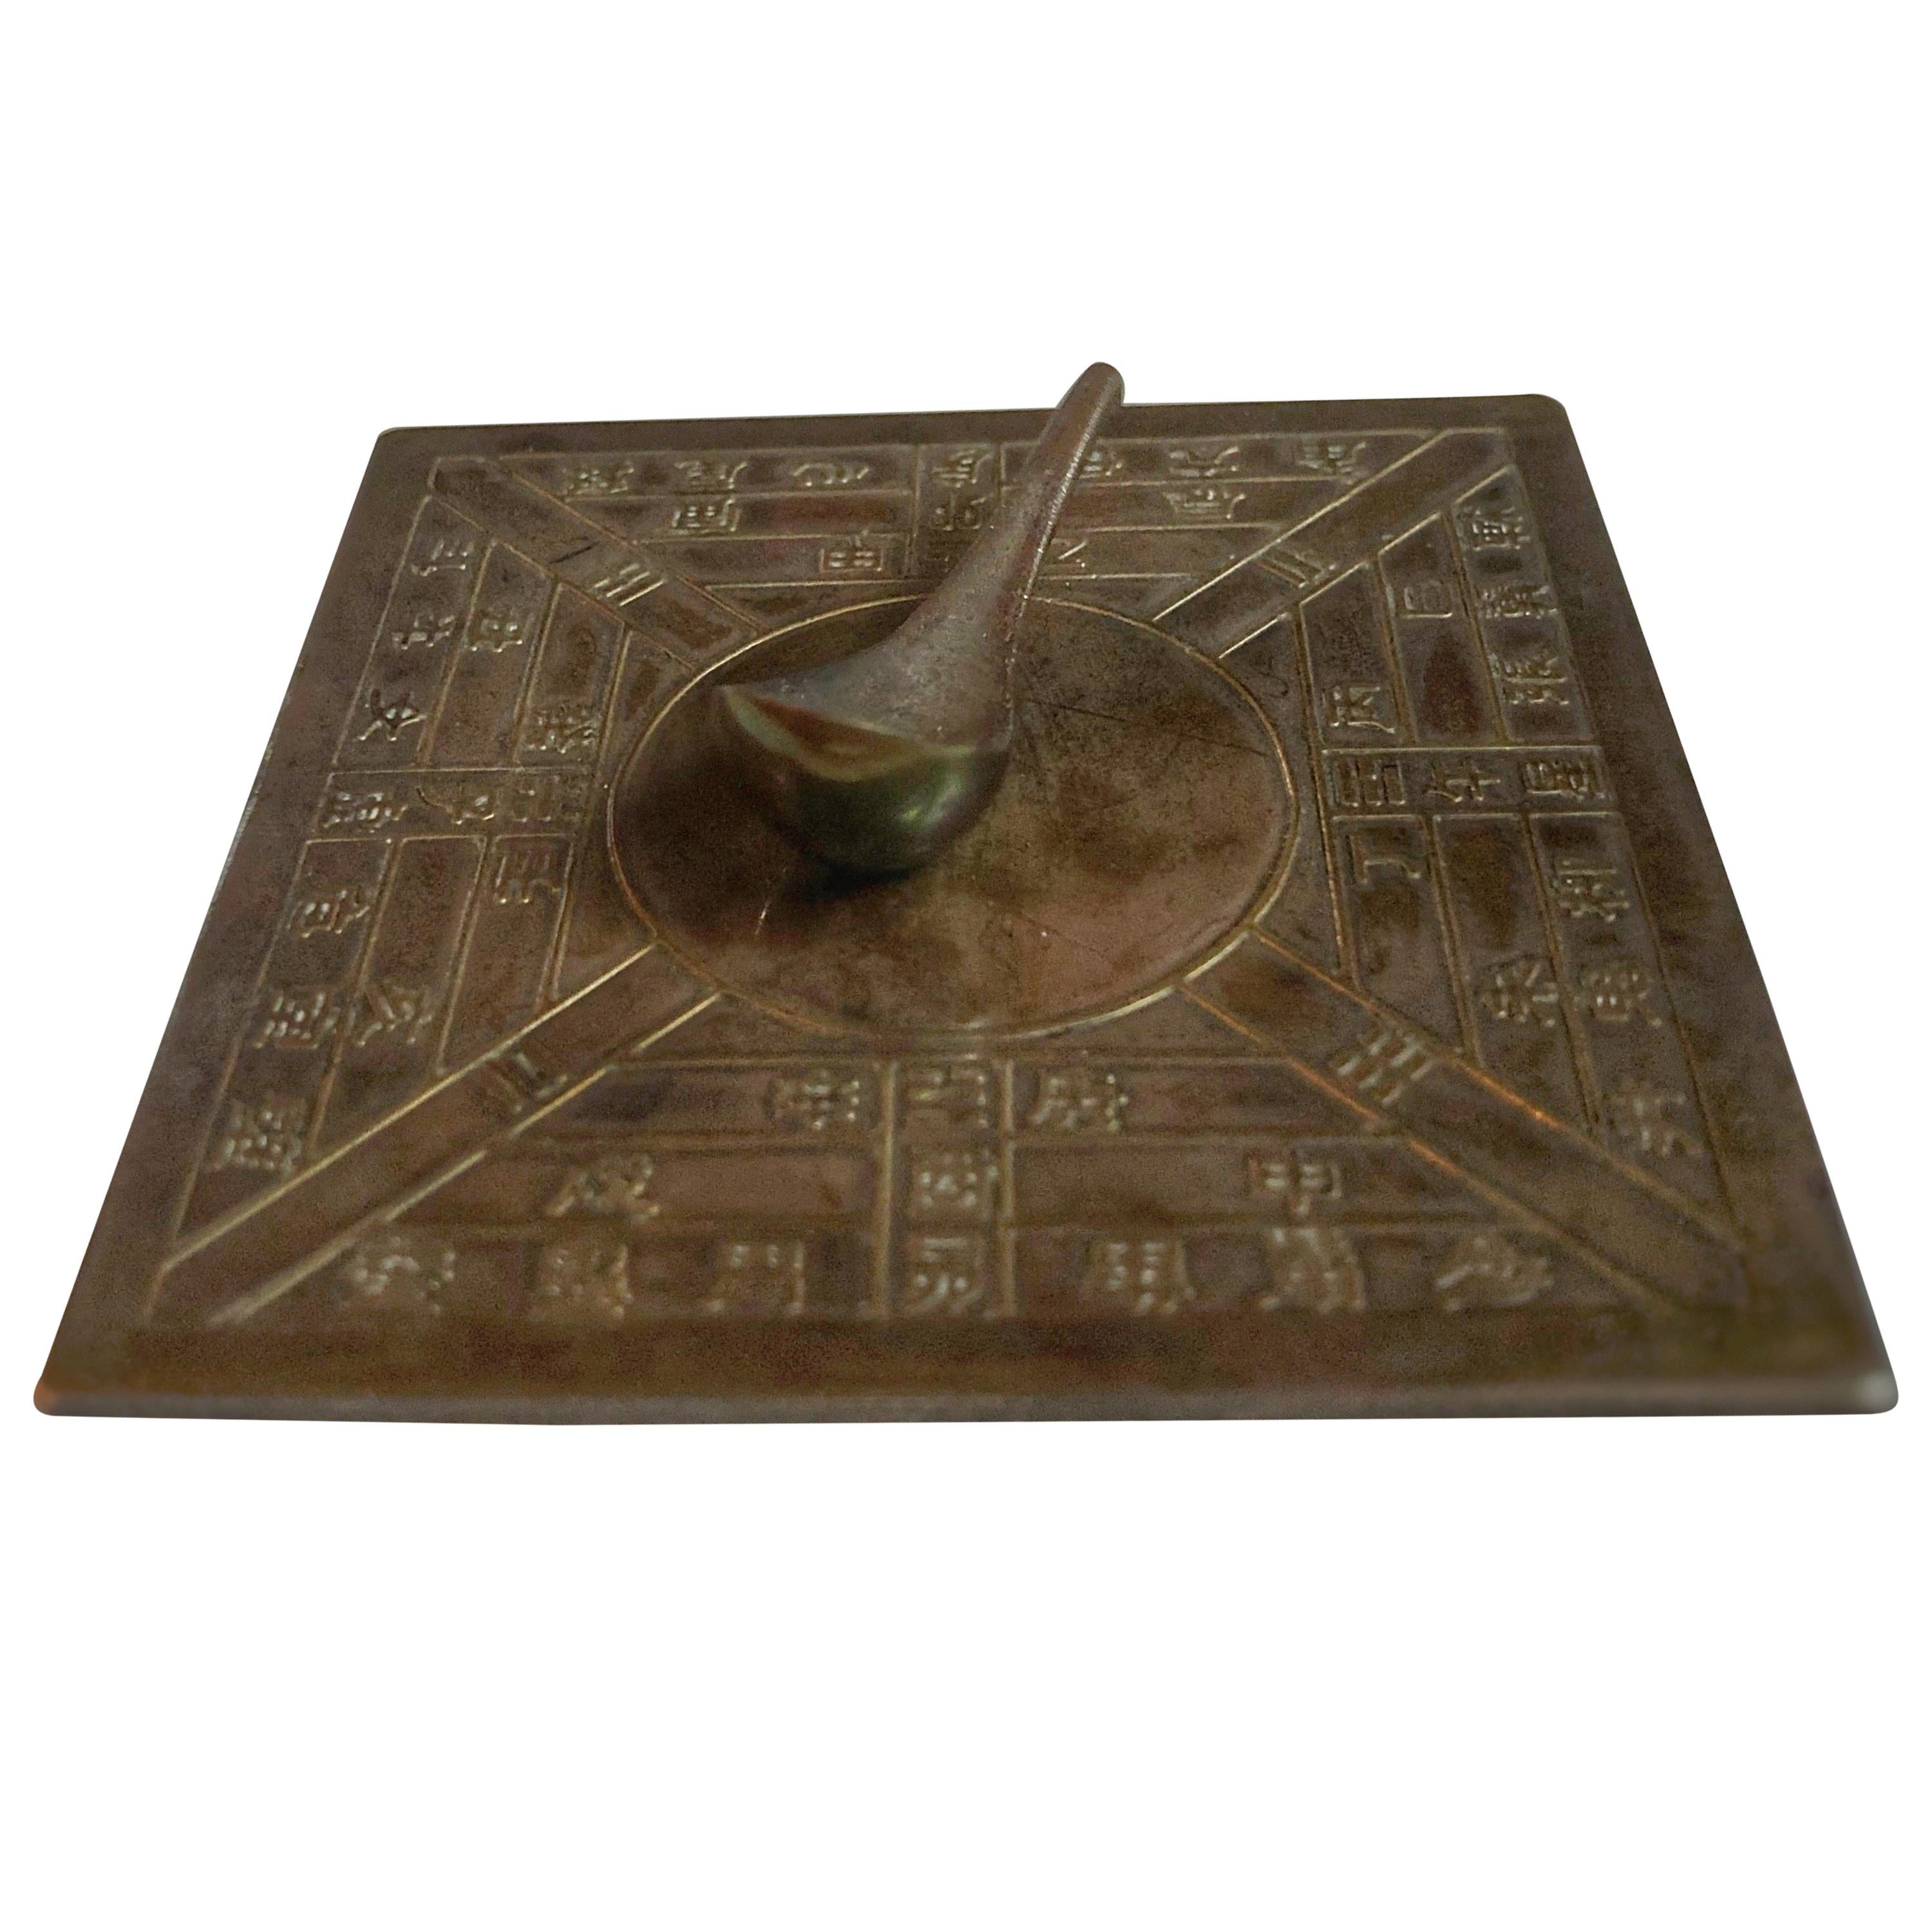 'Four Great Inventions in China' Si Nan Spoon Magnetic Han Dynasty Compass SALE 